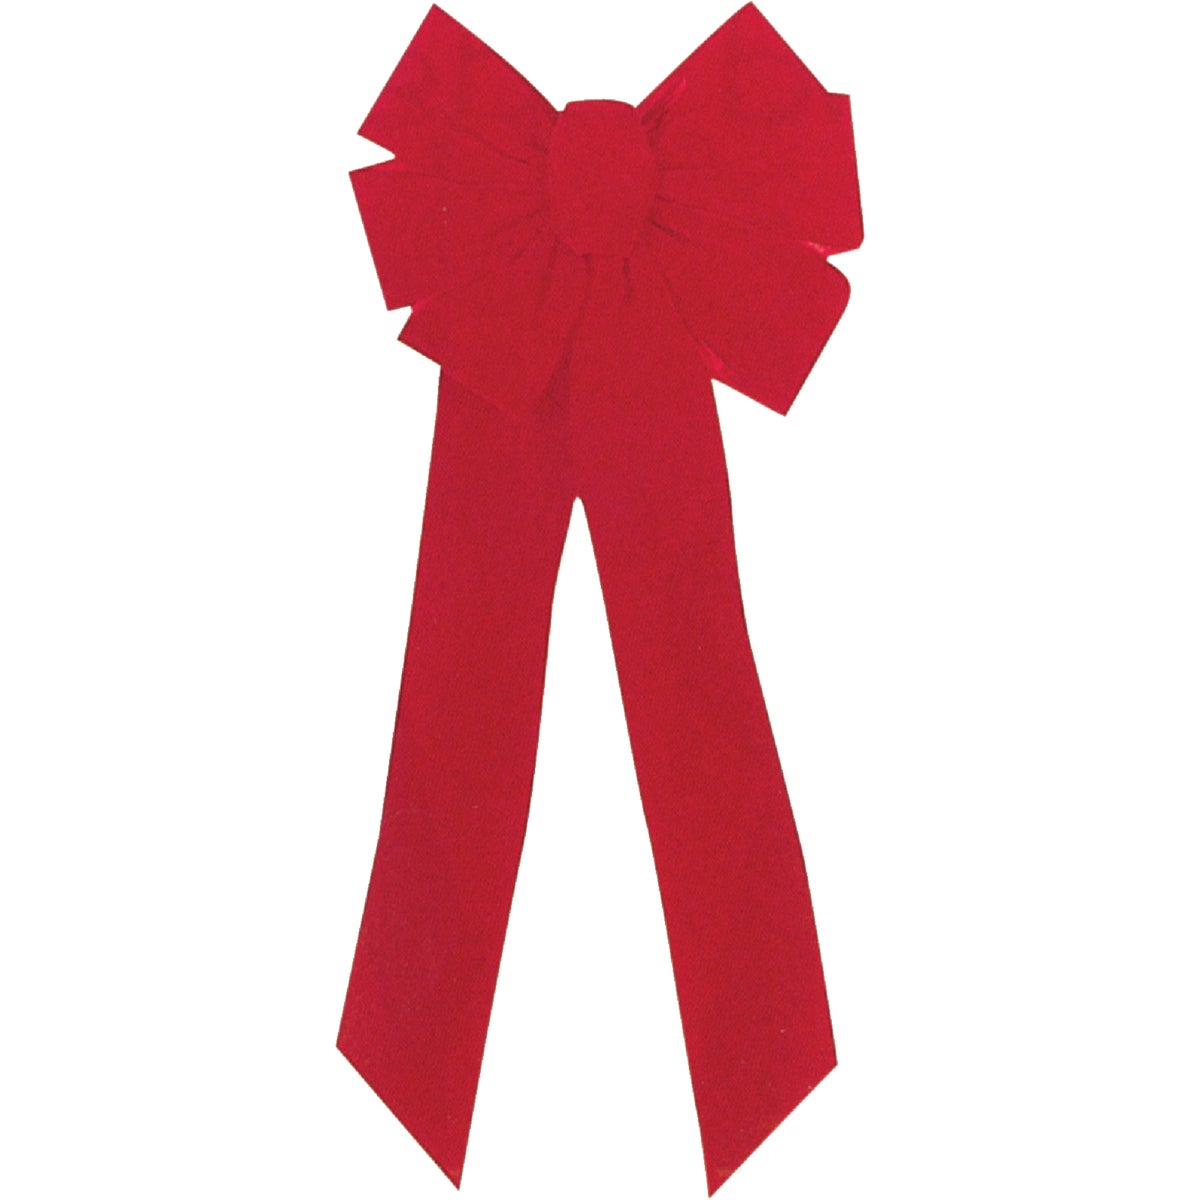 Item 904201, 7-loop deluxe red velvet bow. Ideal for any style of holiday decorating.